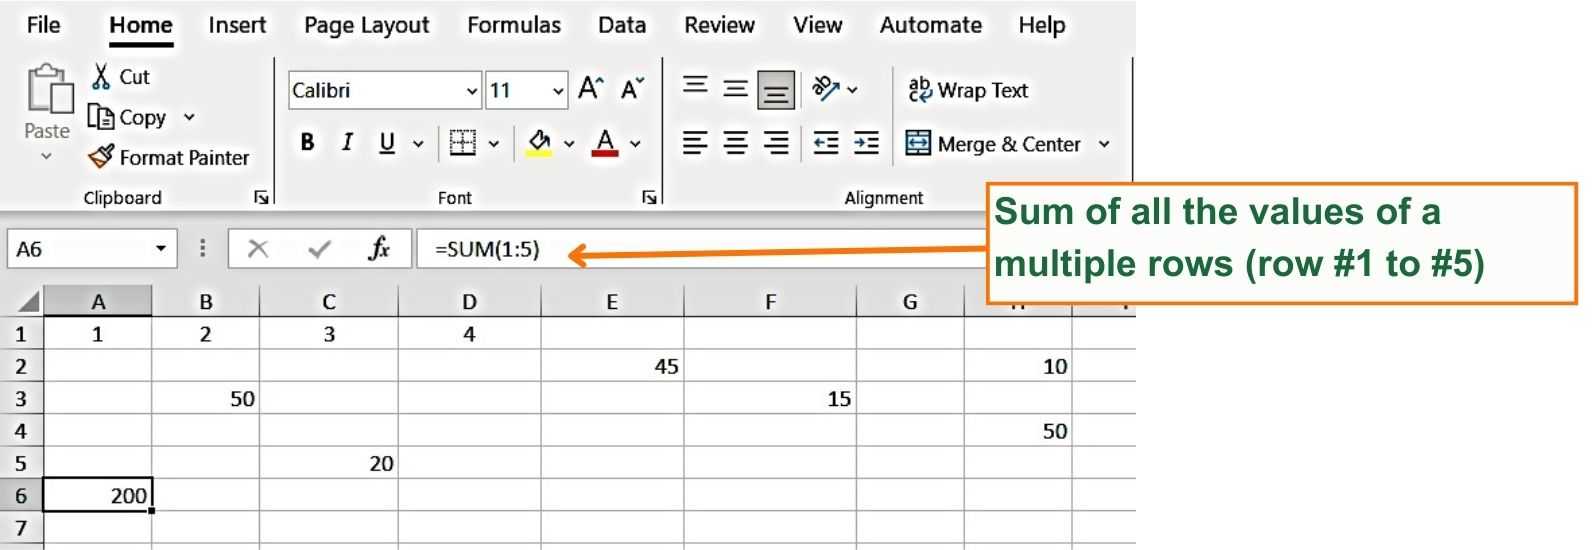 Sum of all the values of a multiple rows (rows from 1 to 5) - Excel Hippo